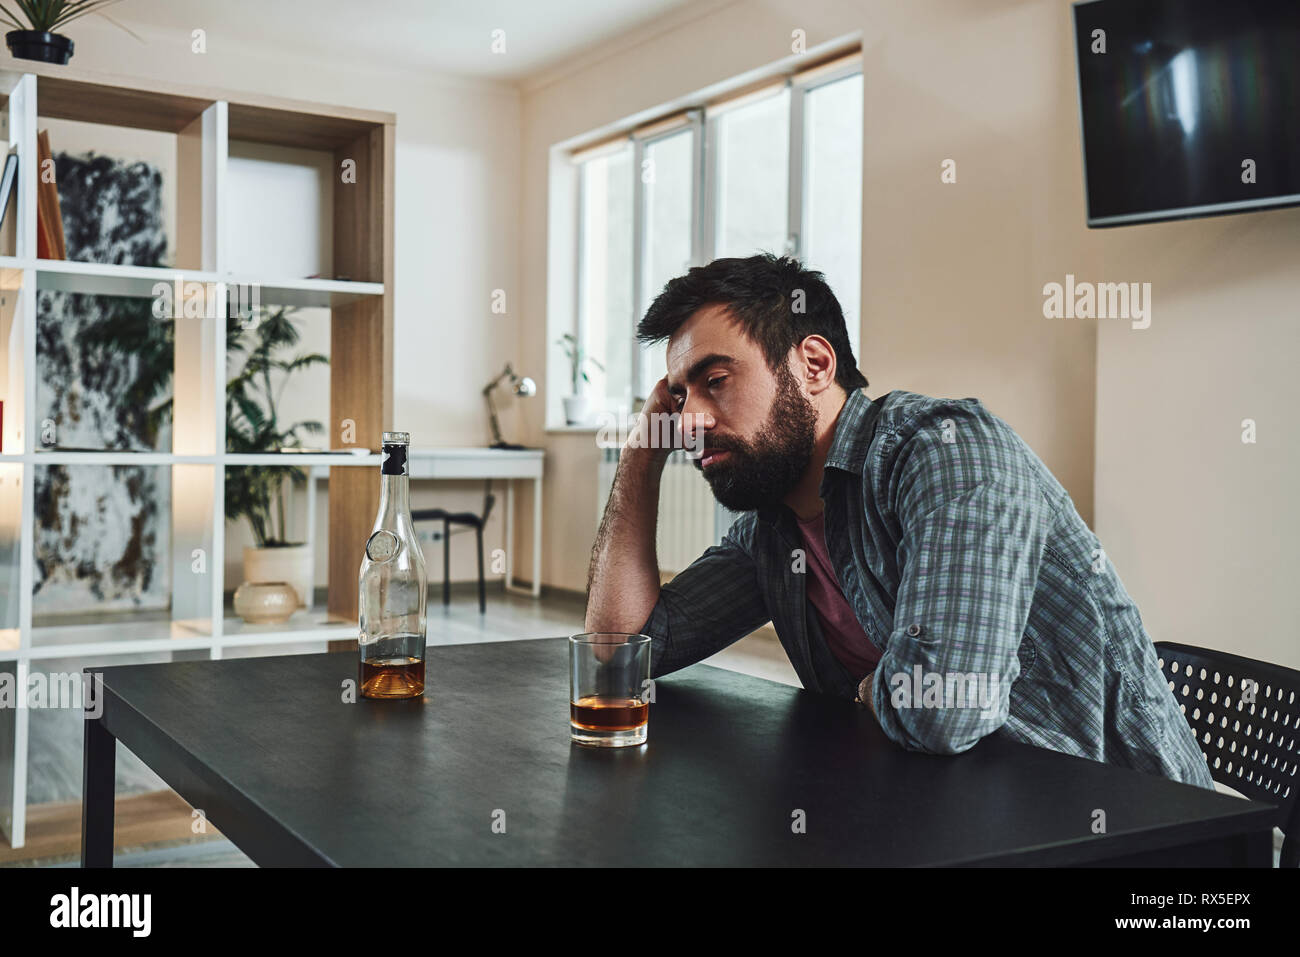 Drinking trouble. Depressed man sits at the table, holding hand on his head. A glass of whiskey stands in front of him. He is thinking about problems  Stock Photo